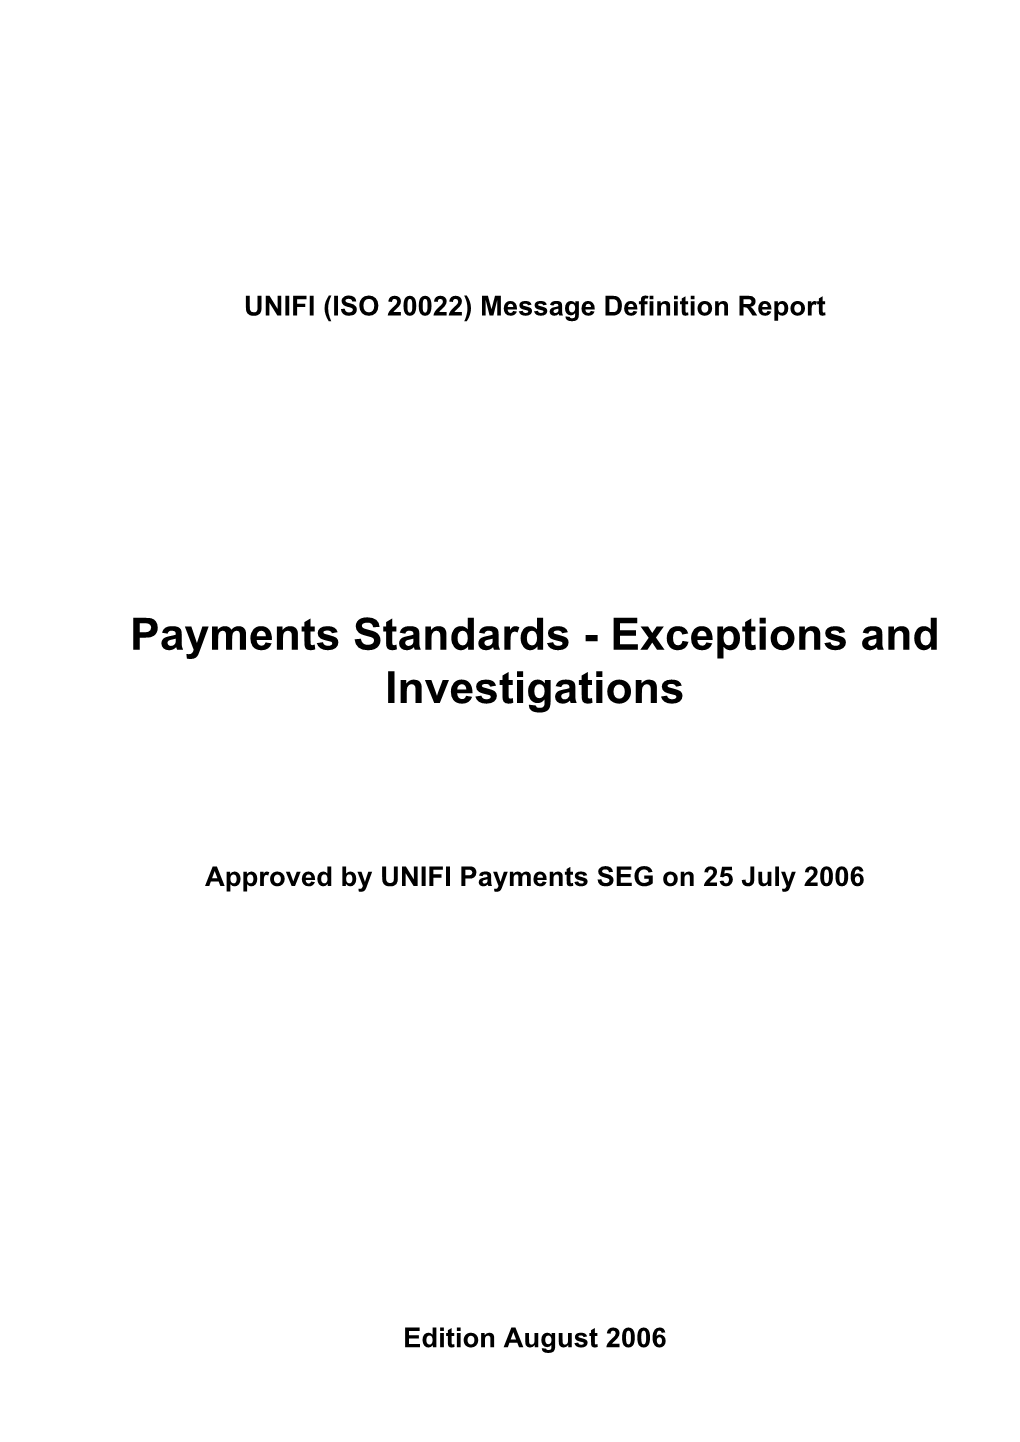 Payments Standards - Exceptions and Investigations